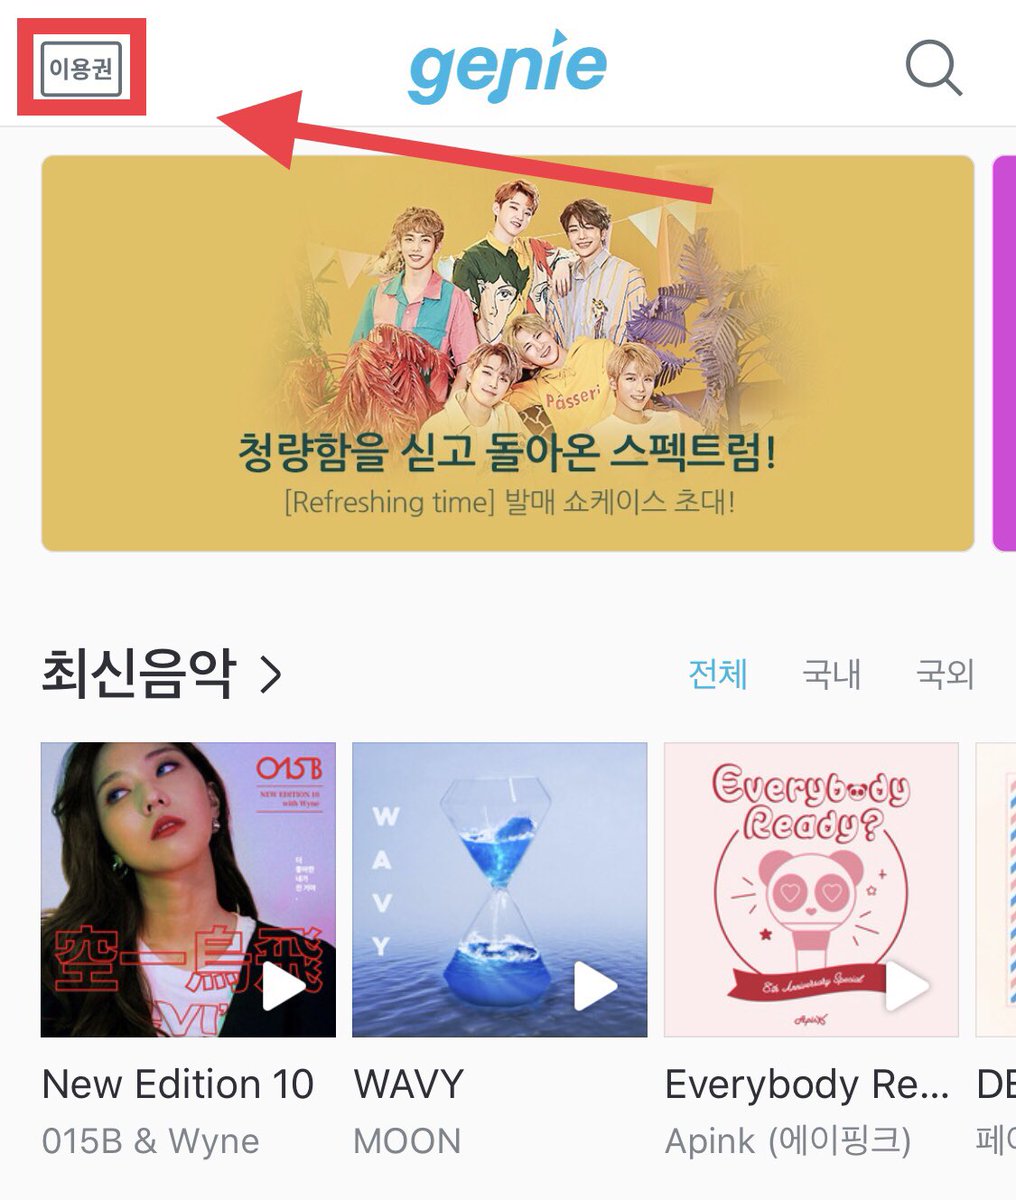 For Genie once you have the app you can sign in using Twitter, Facebook or Kakao! You can purchase a streaming pass through the app. If you are unable to buy a pass directly from the app I will add a list of group orders where you can purchase both Genie and Melon passes below.